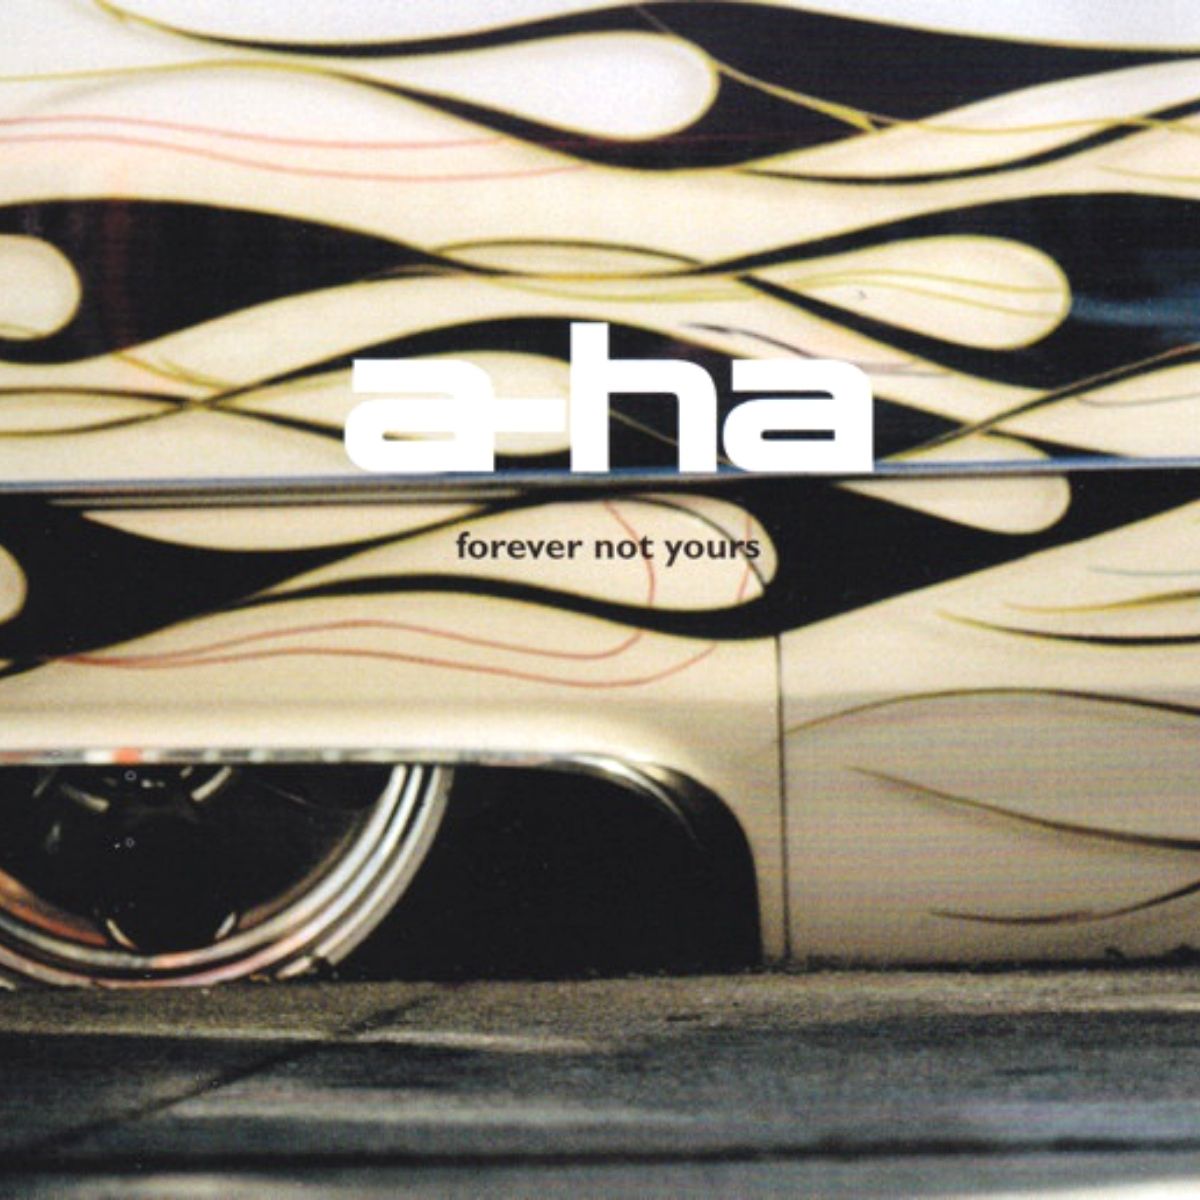 The cover of the single "Forever Not Yours" by A-ha.